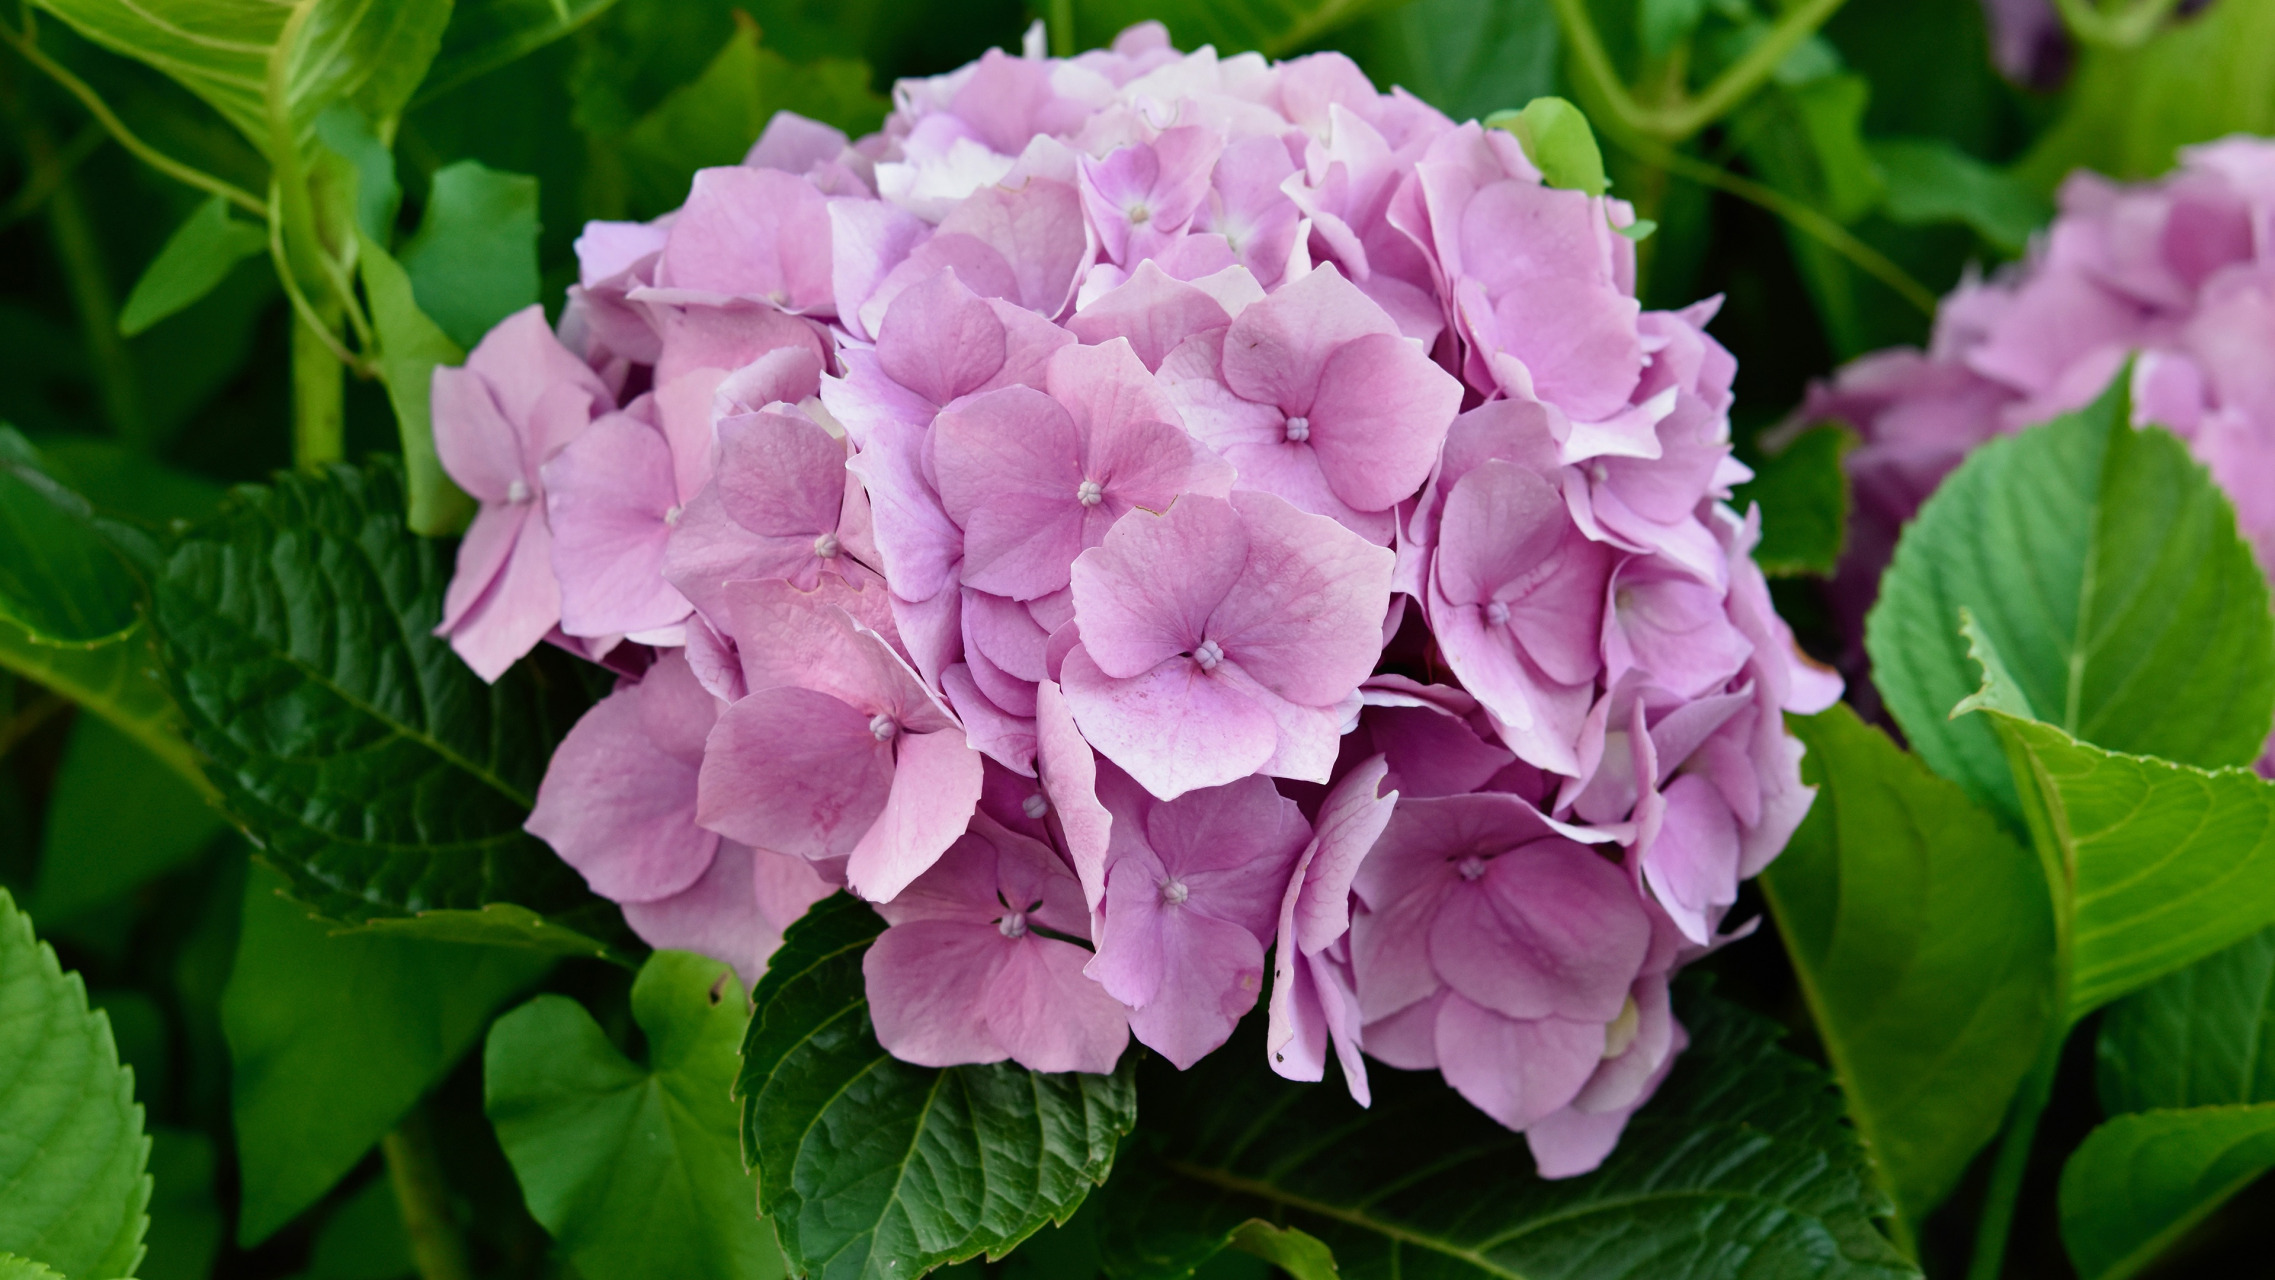 Lavender-Colored Hydrangea - Image Abyss